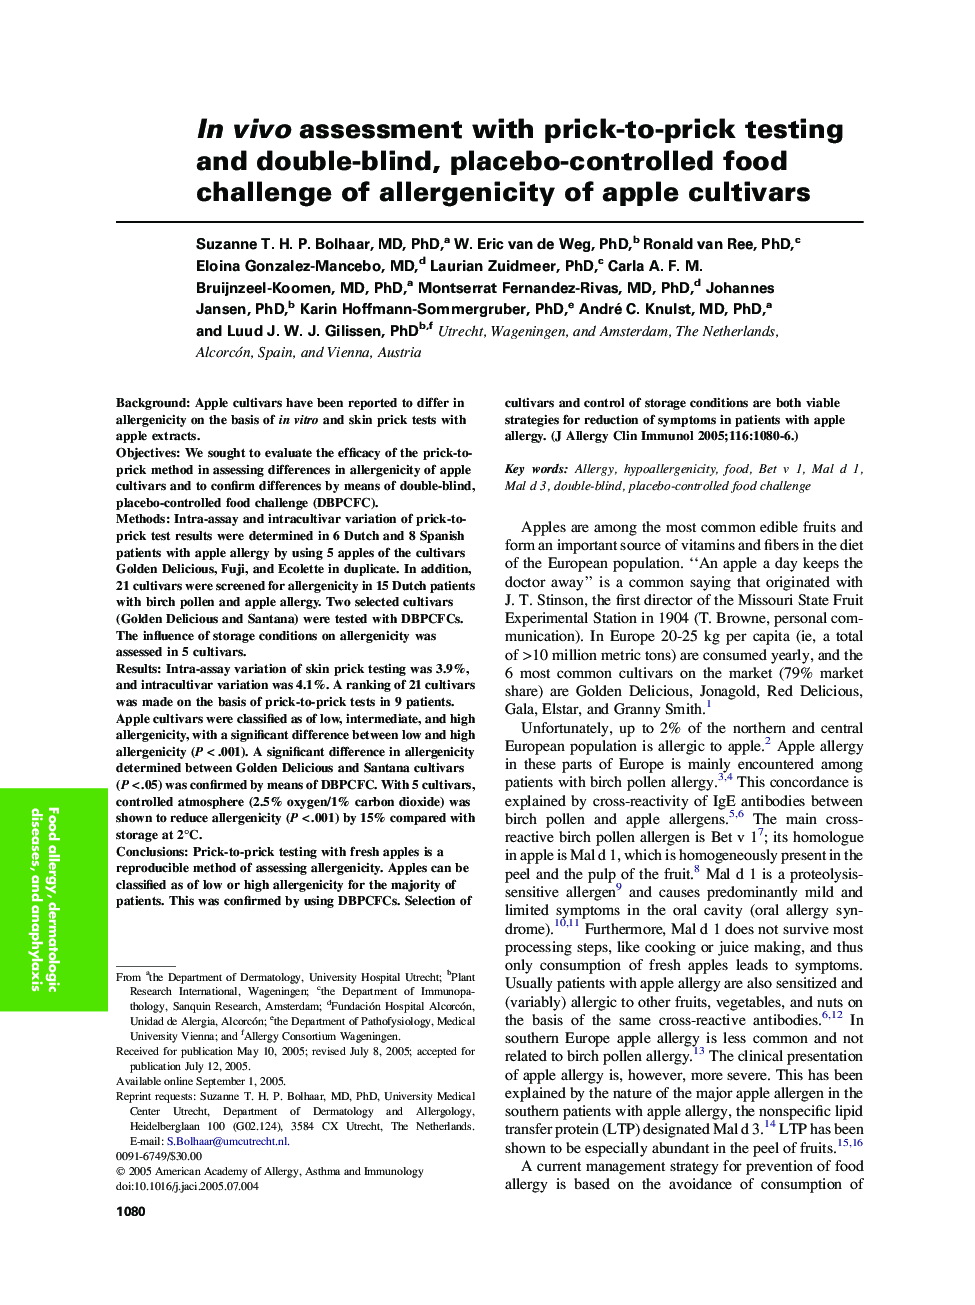 In vivo assessment with prick-to-prick testing and double-blind, placebo-controlled food challenge of allergenicity of apple cultivars